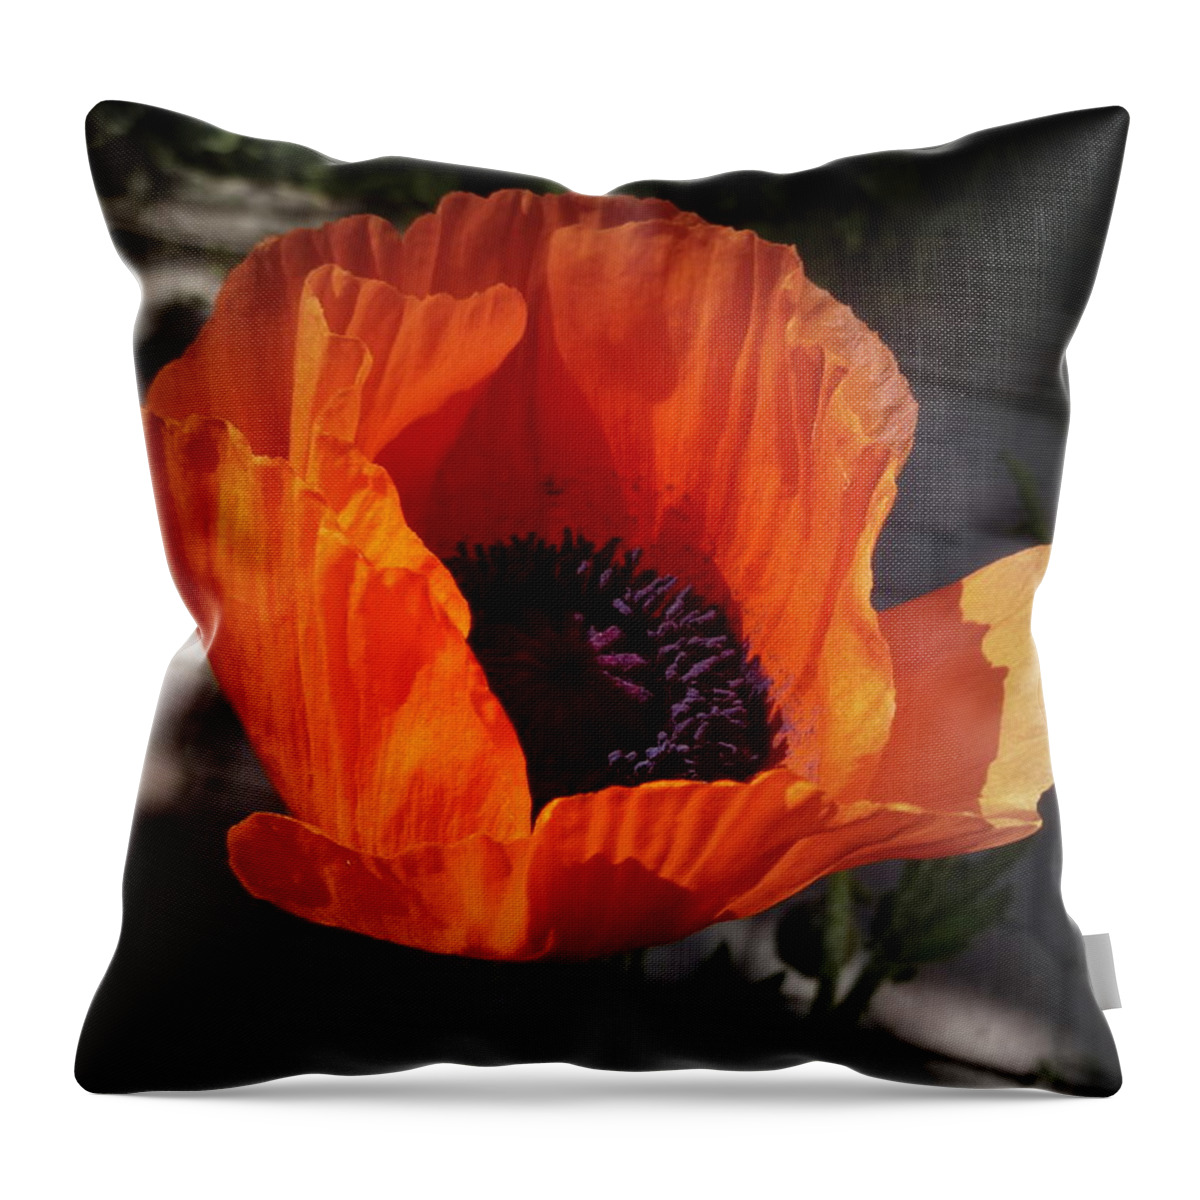 Background Throw Pillow featuring the photograph Sunshine Poppy by Lingfai Leung